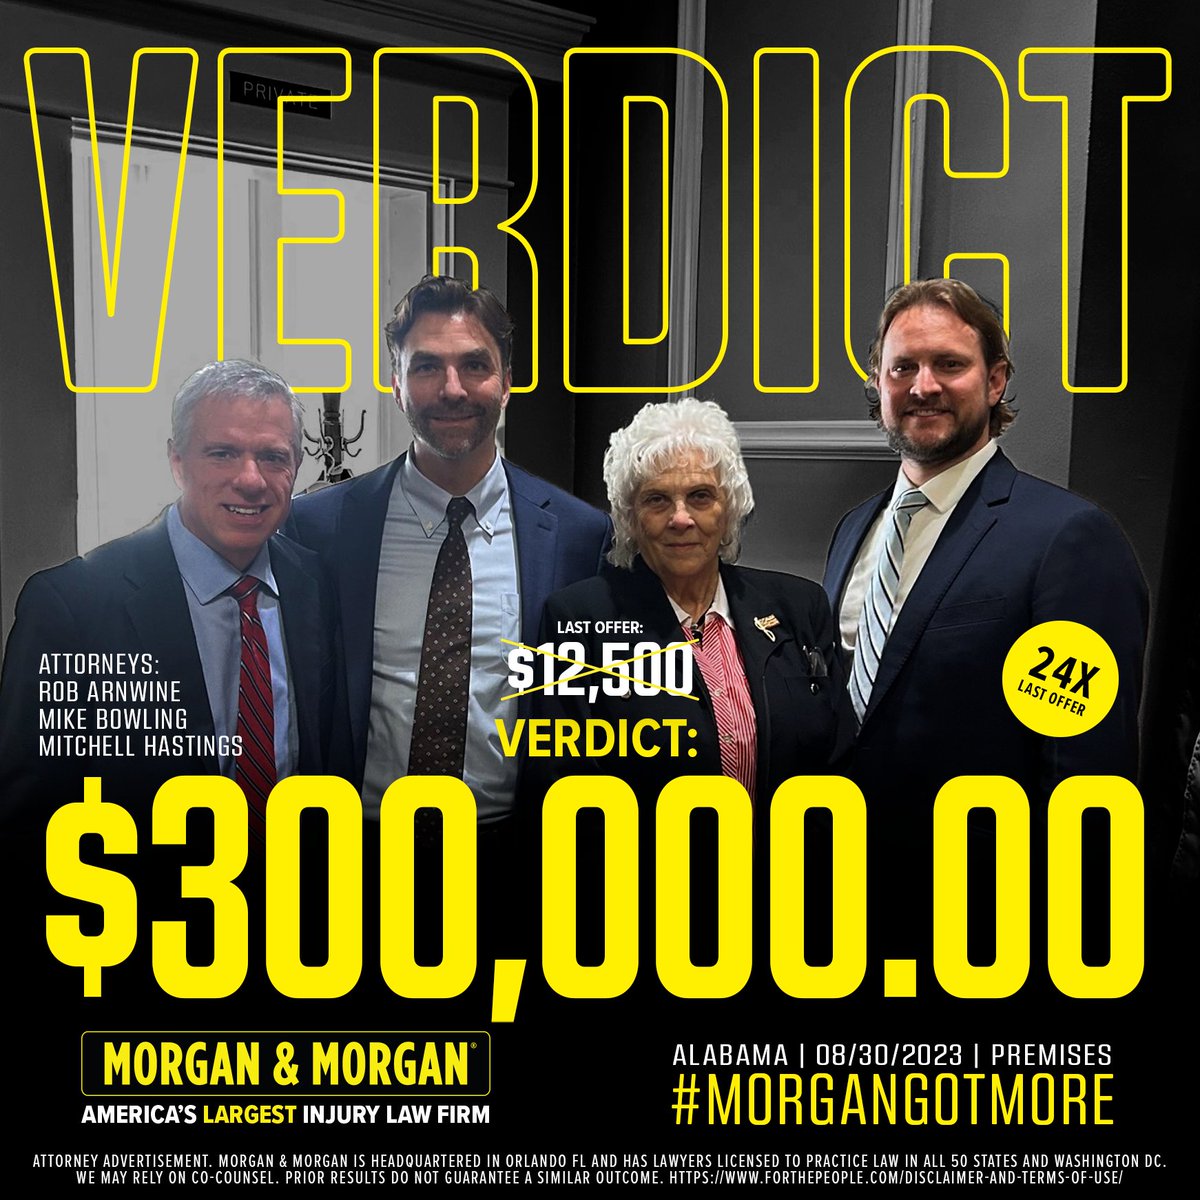 🚨 #VerdictAlert:

Rob Arnwine, Mike Bowling and Mitchell Hastings just secured a $300,000.00 verdict for our client in Alabama!

That's 24x the last offer 🚀

#MorganGotMore #ForThePeople